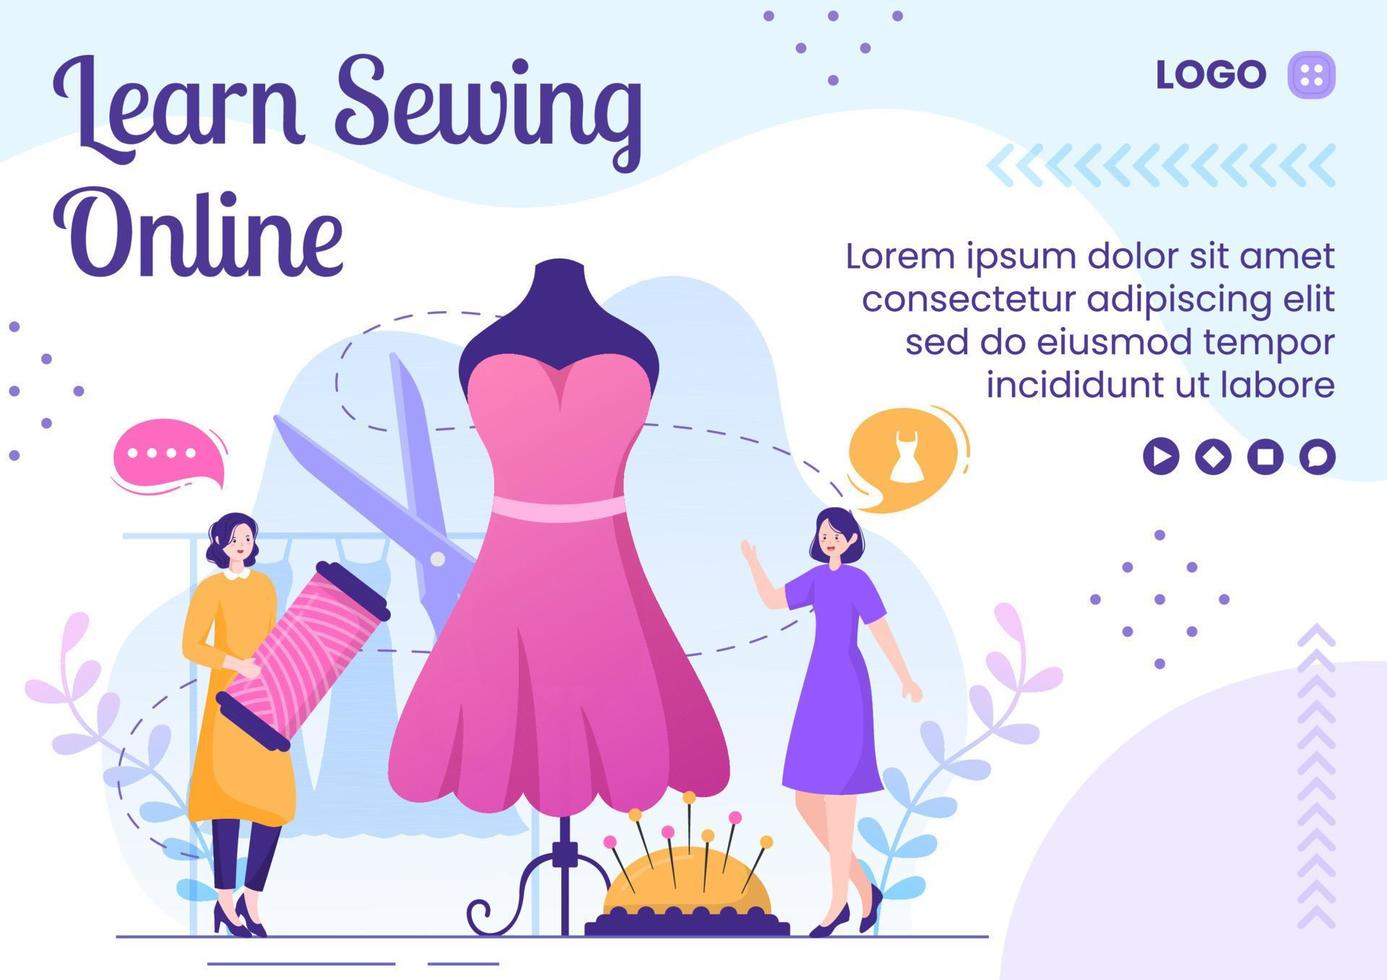 Sewing or Tailor Classes Brochure Template Flat Illustration Editable of Square Background Suitable for Social media, Greeting Card and Web Internet vector